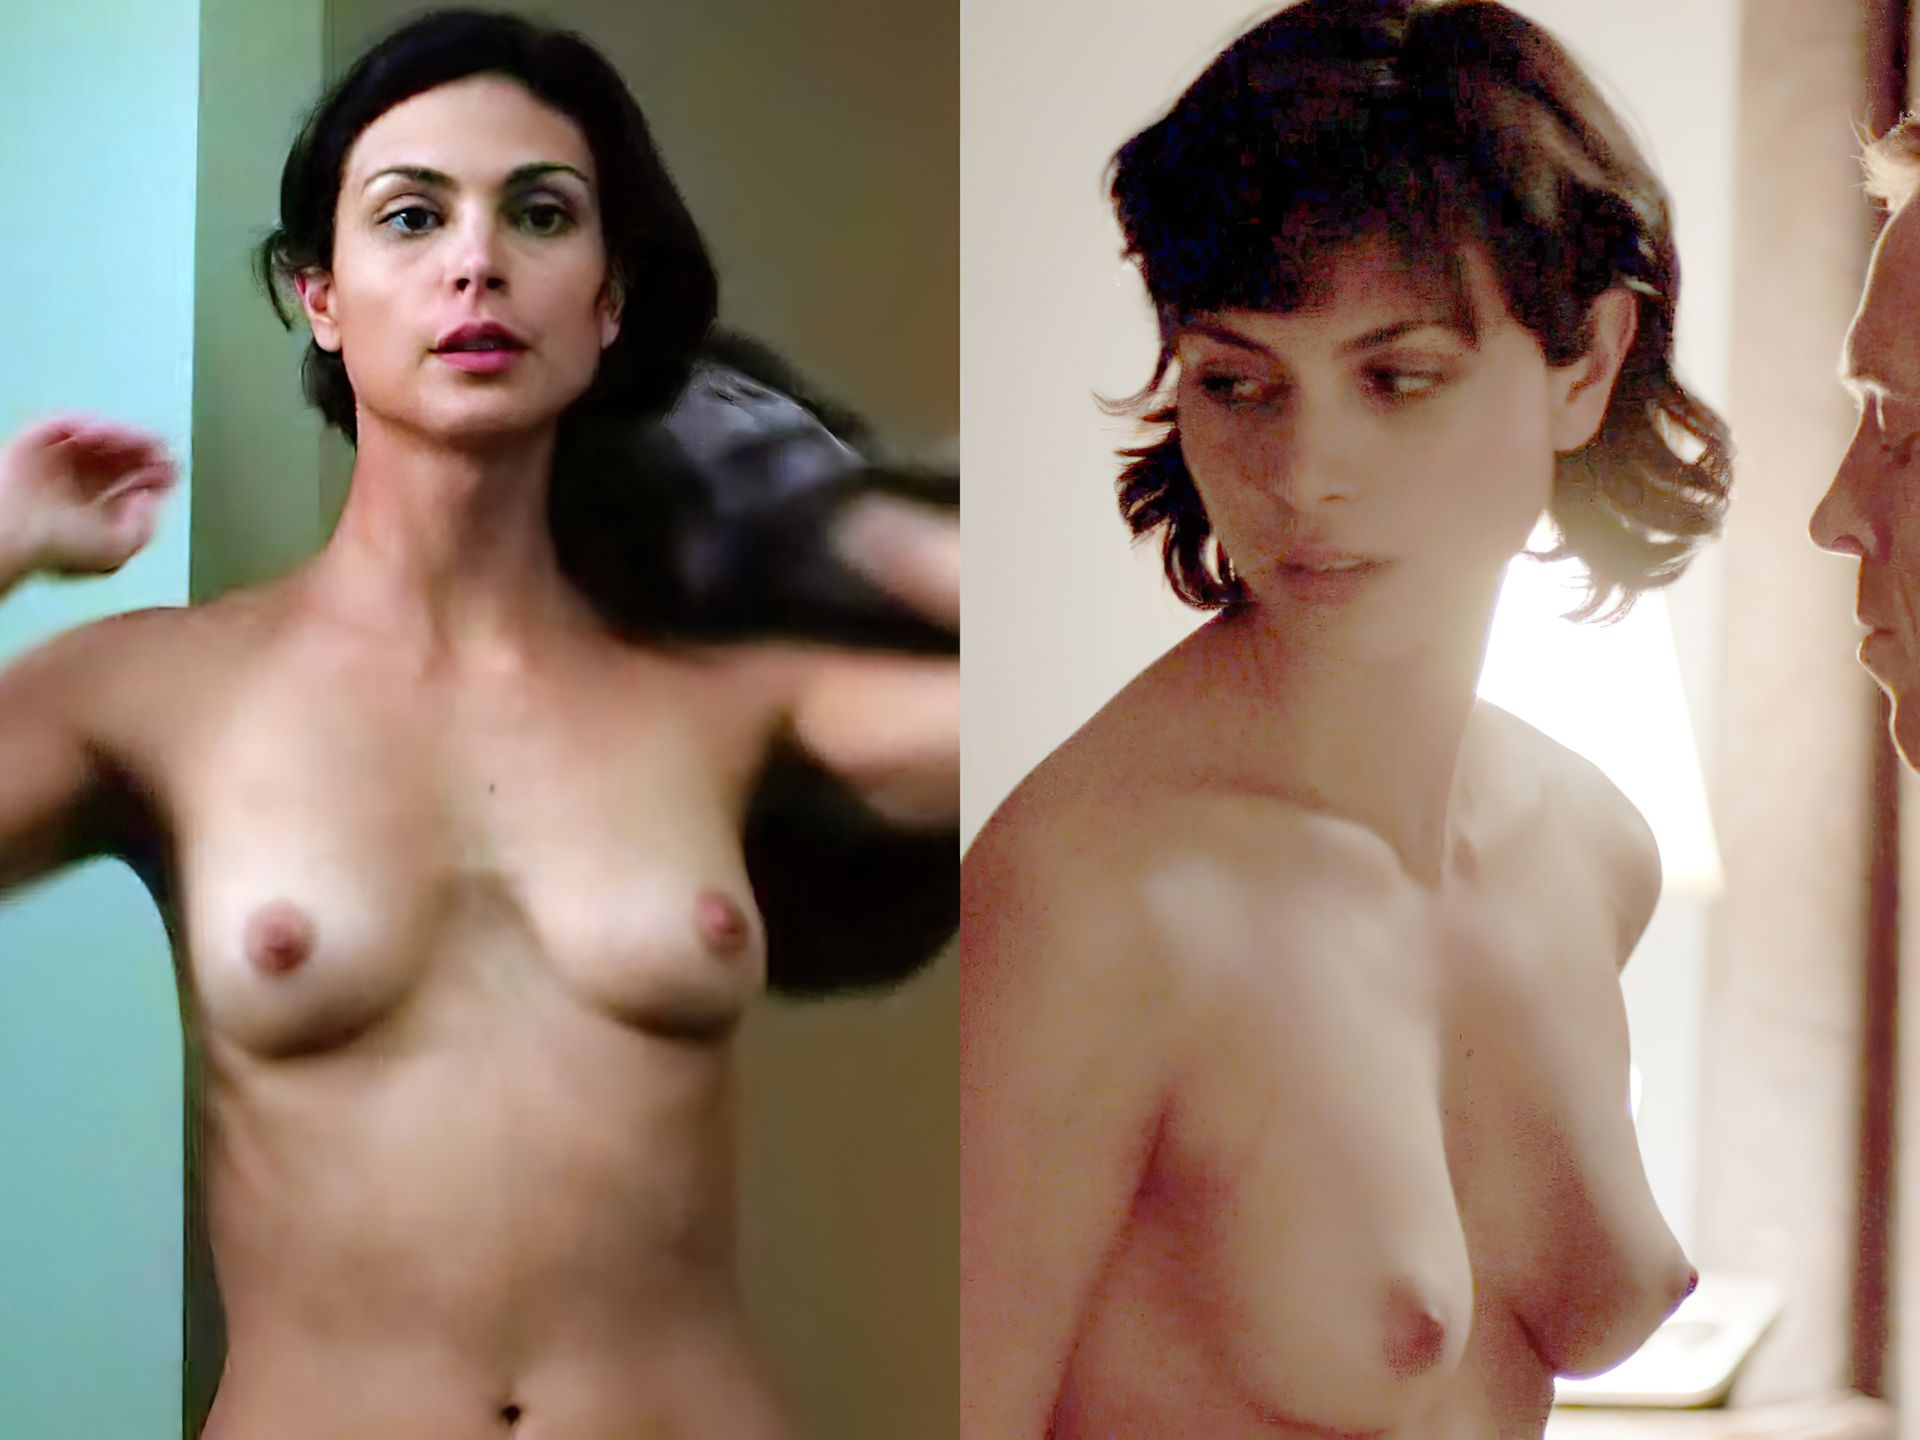 Morena Baccarin Nude Scenes From Homeland 0001.